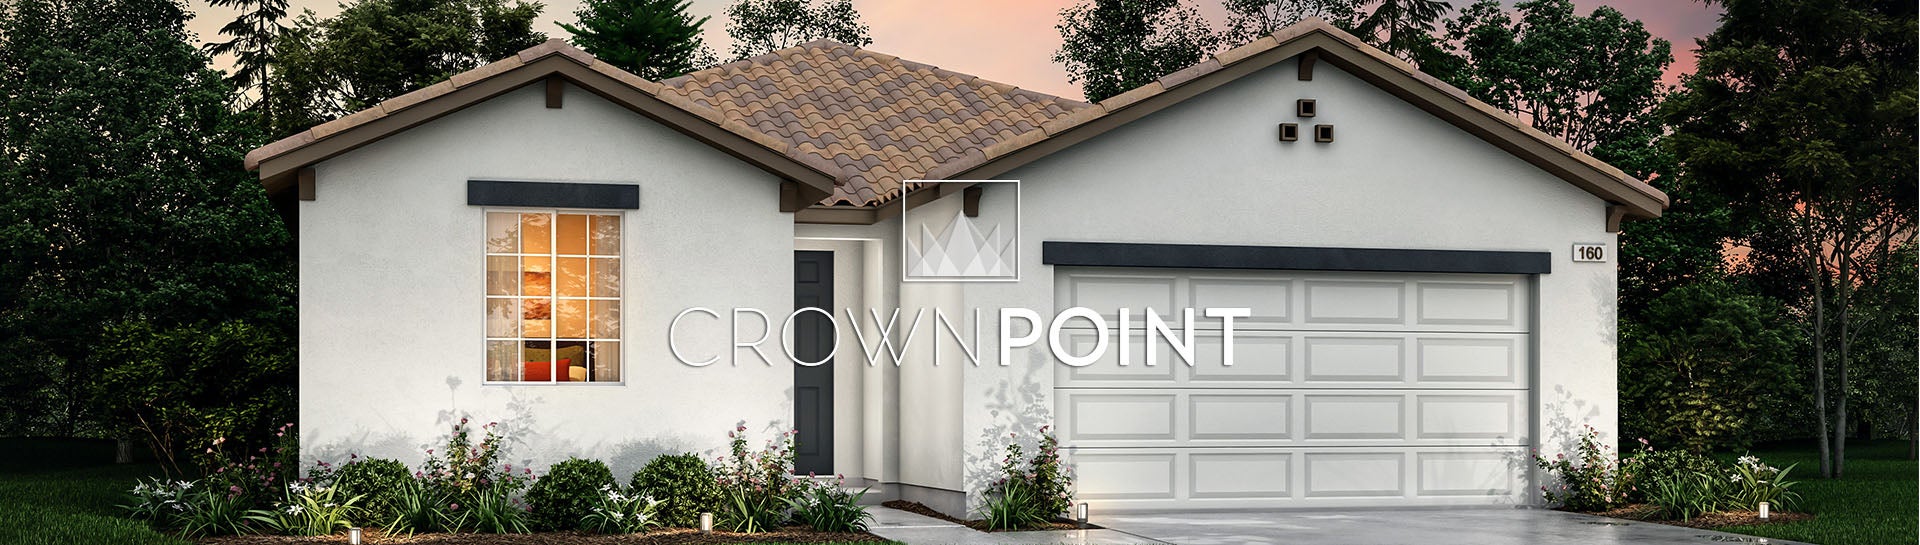 Homesites Will Release on June 5 for Newest De Young Community, Crown Point.